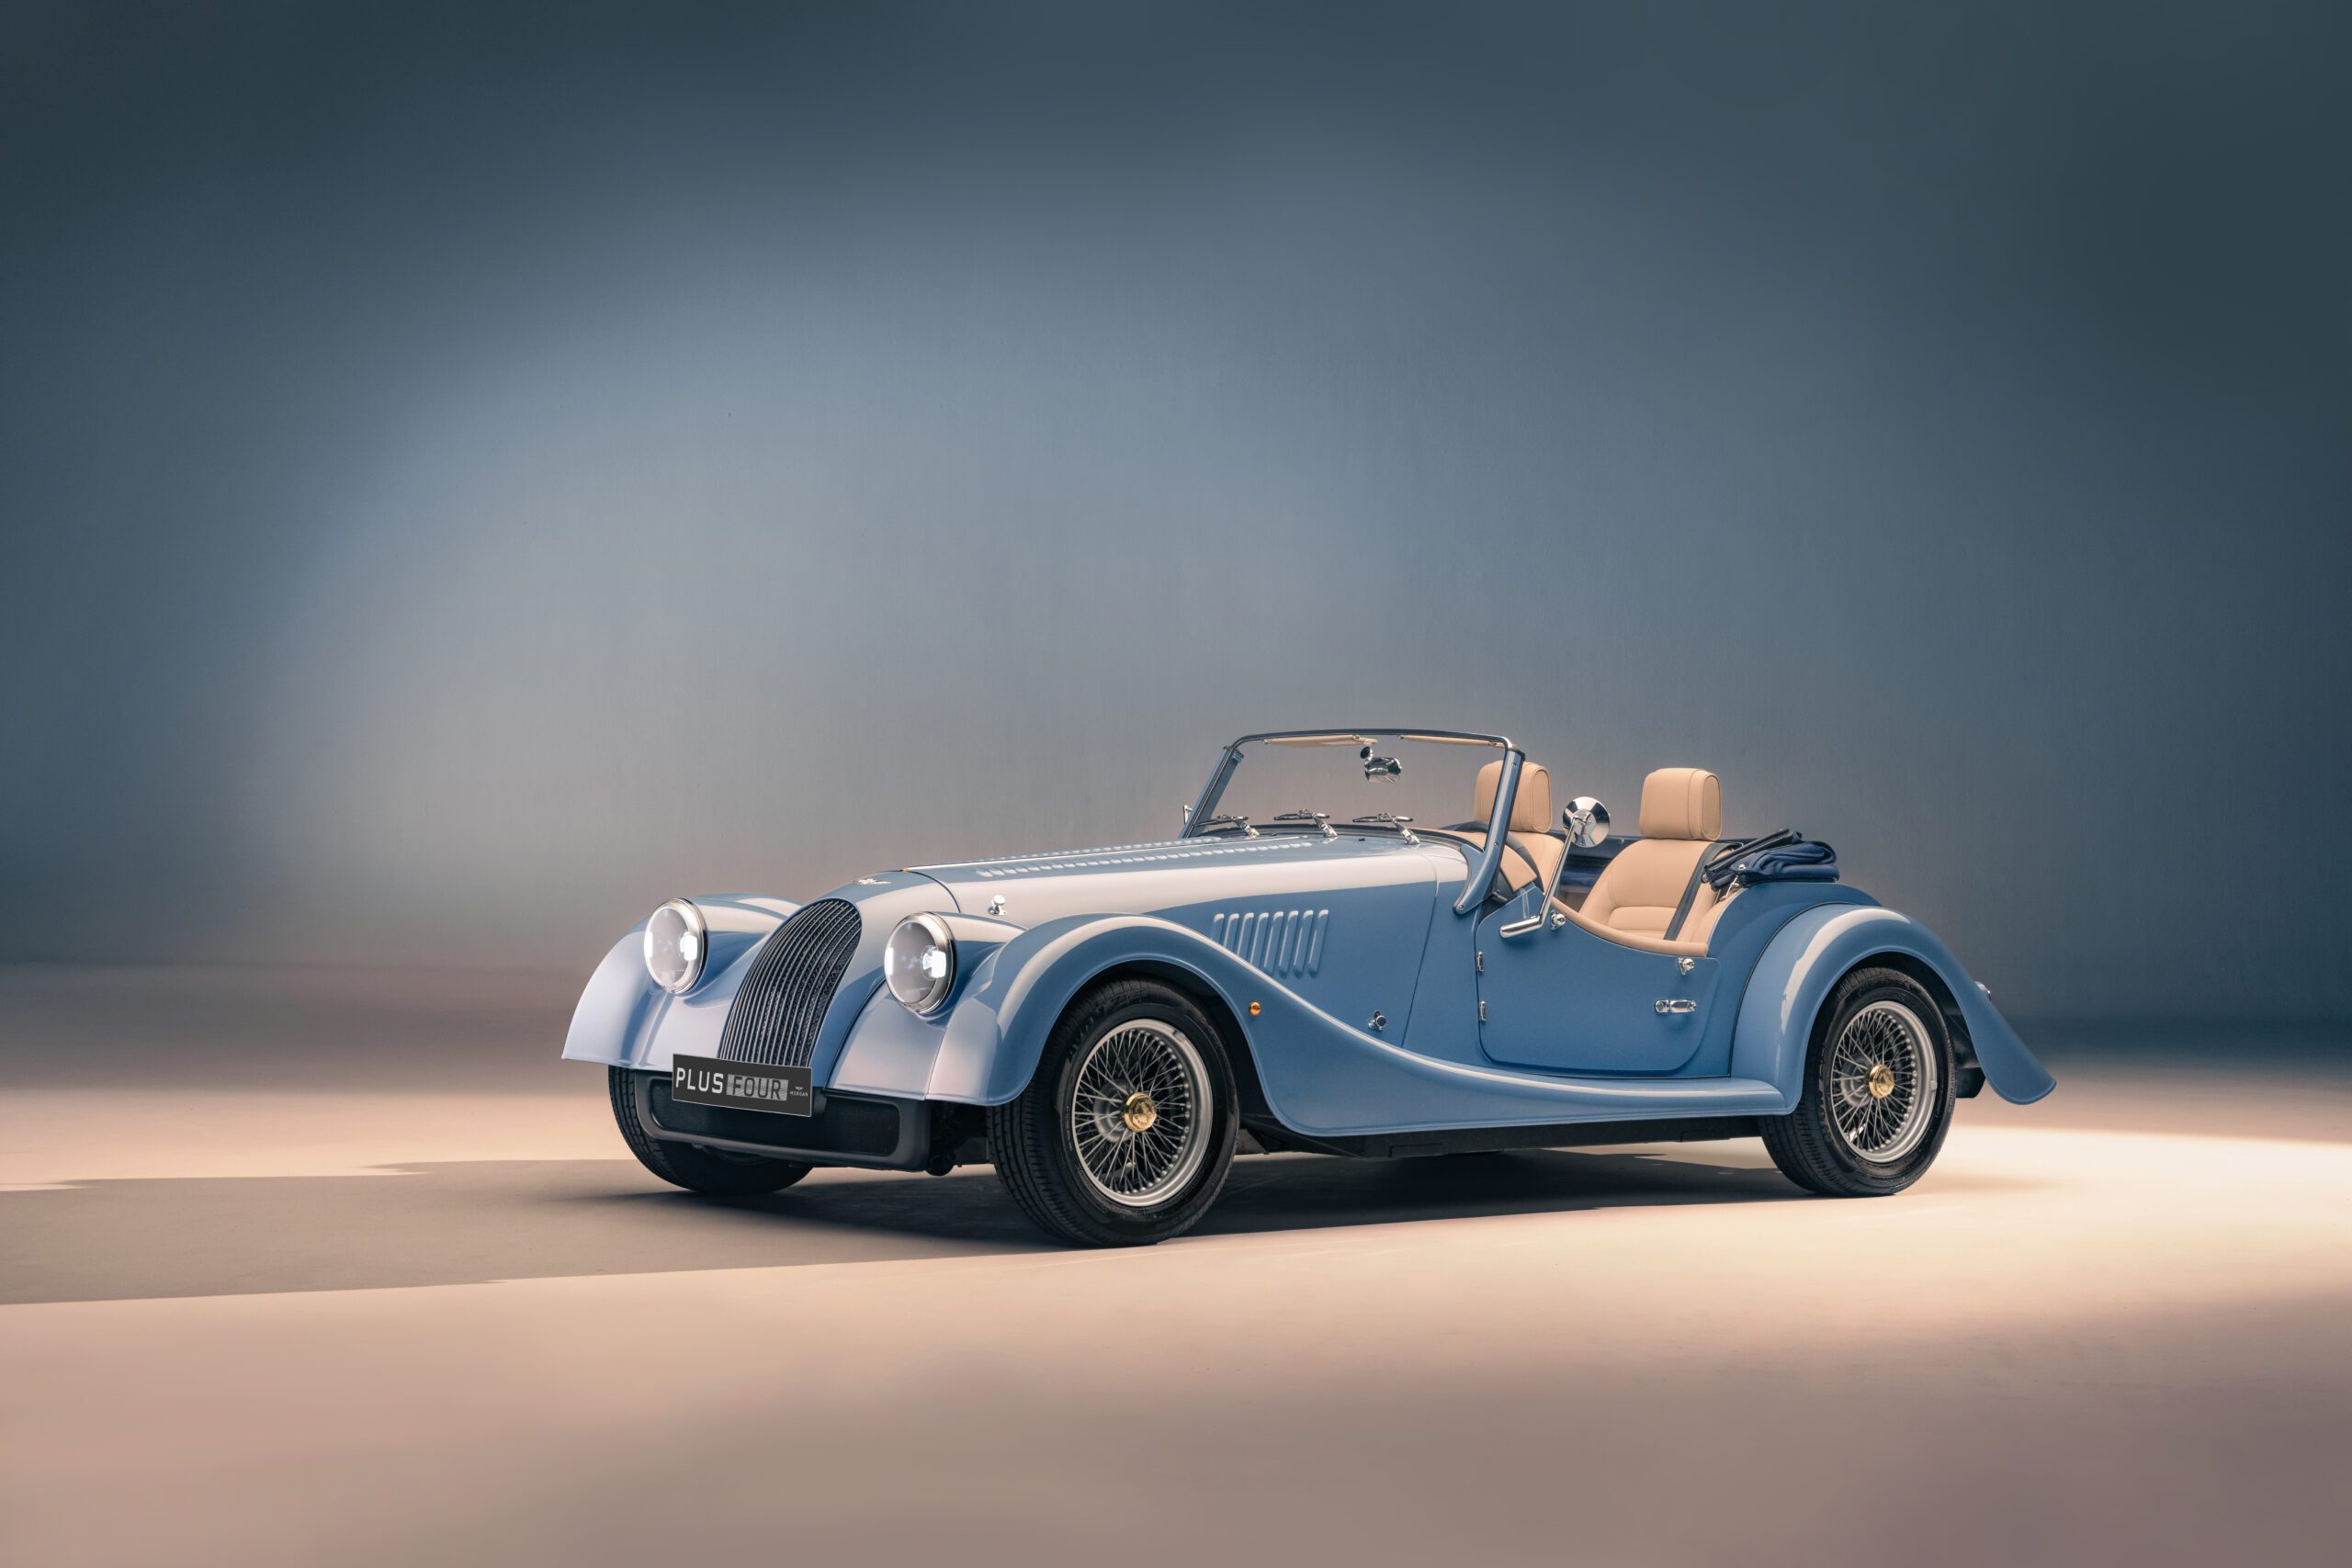 Morgan Motor top down and showing off new wings and headlights.